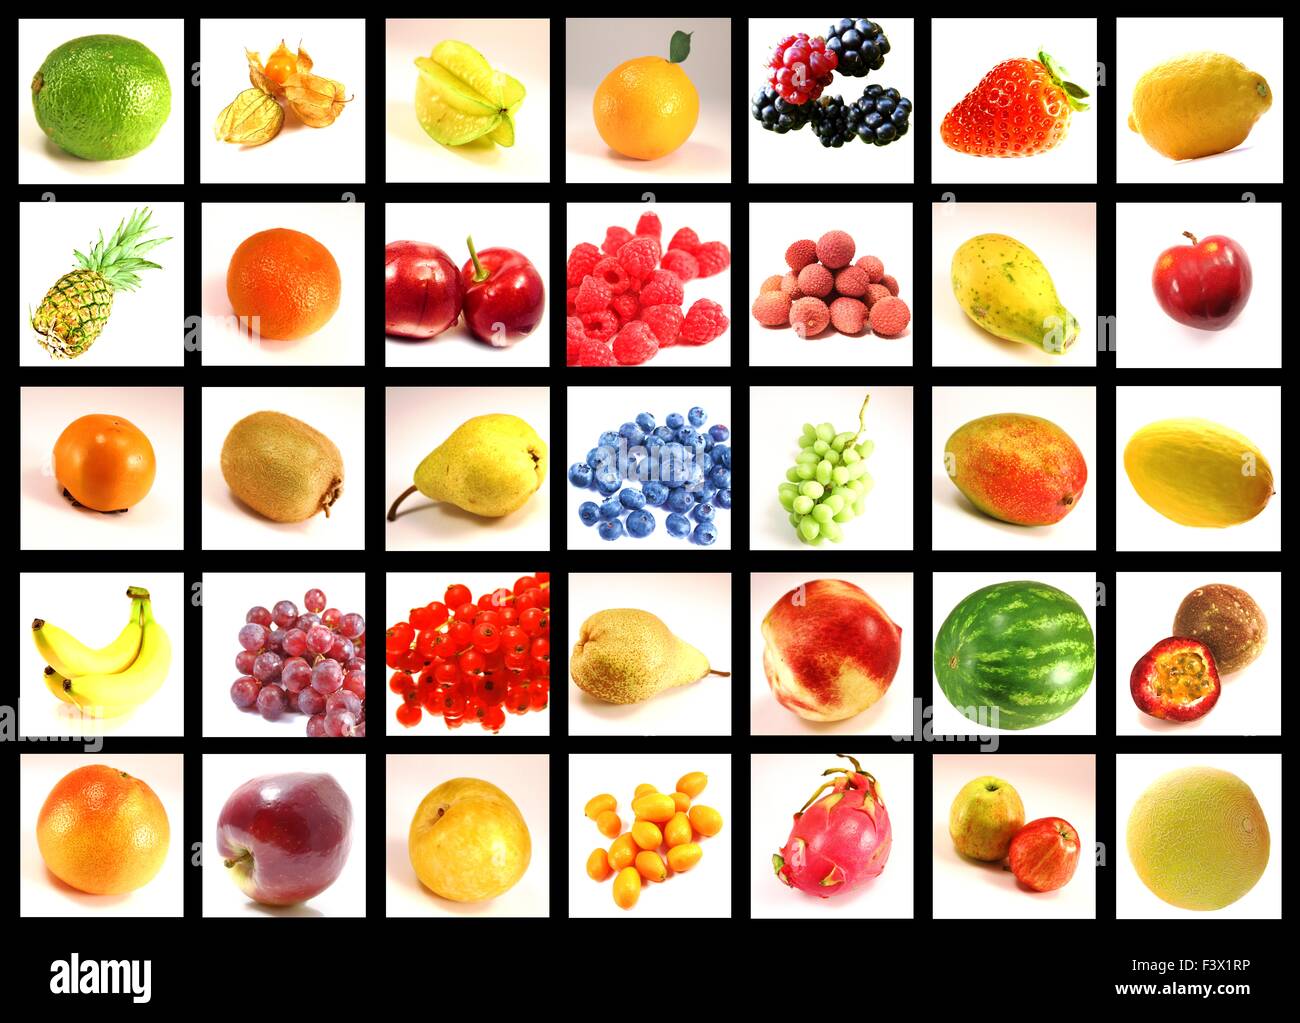 Fruits from around the world Stock Photo